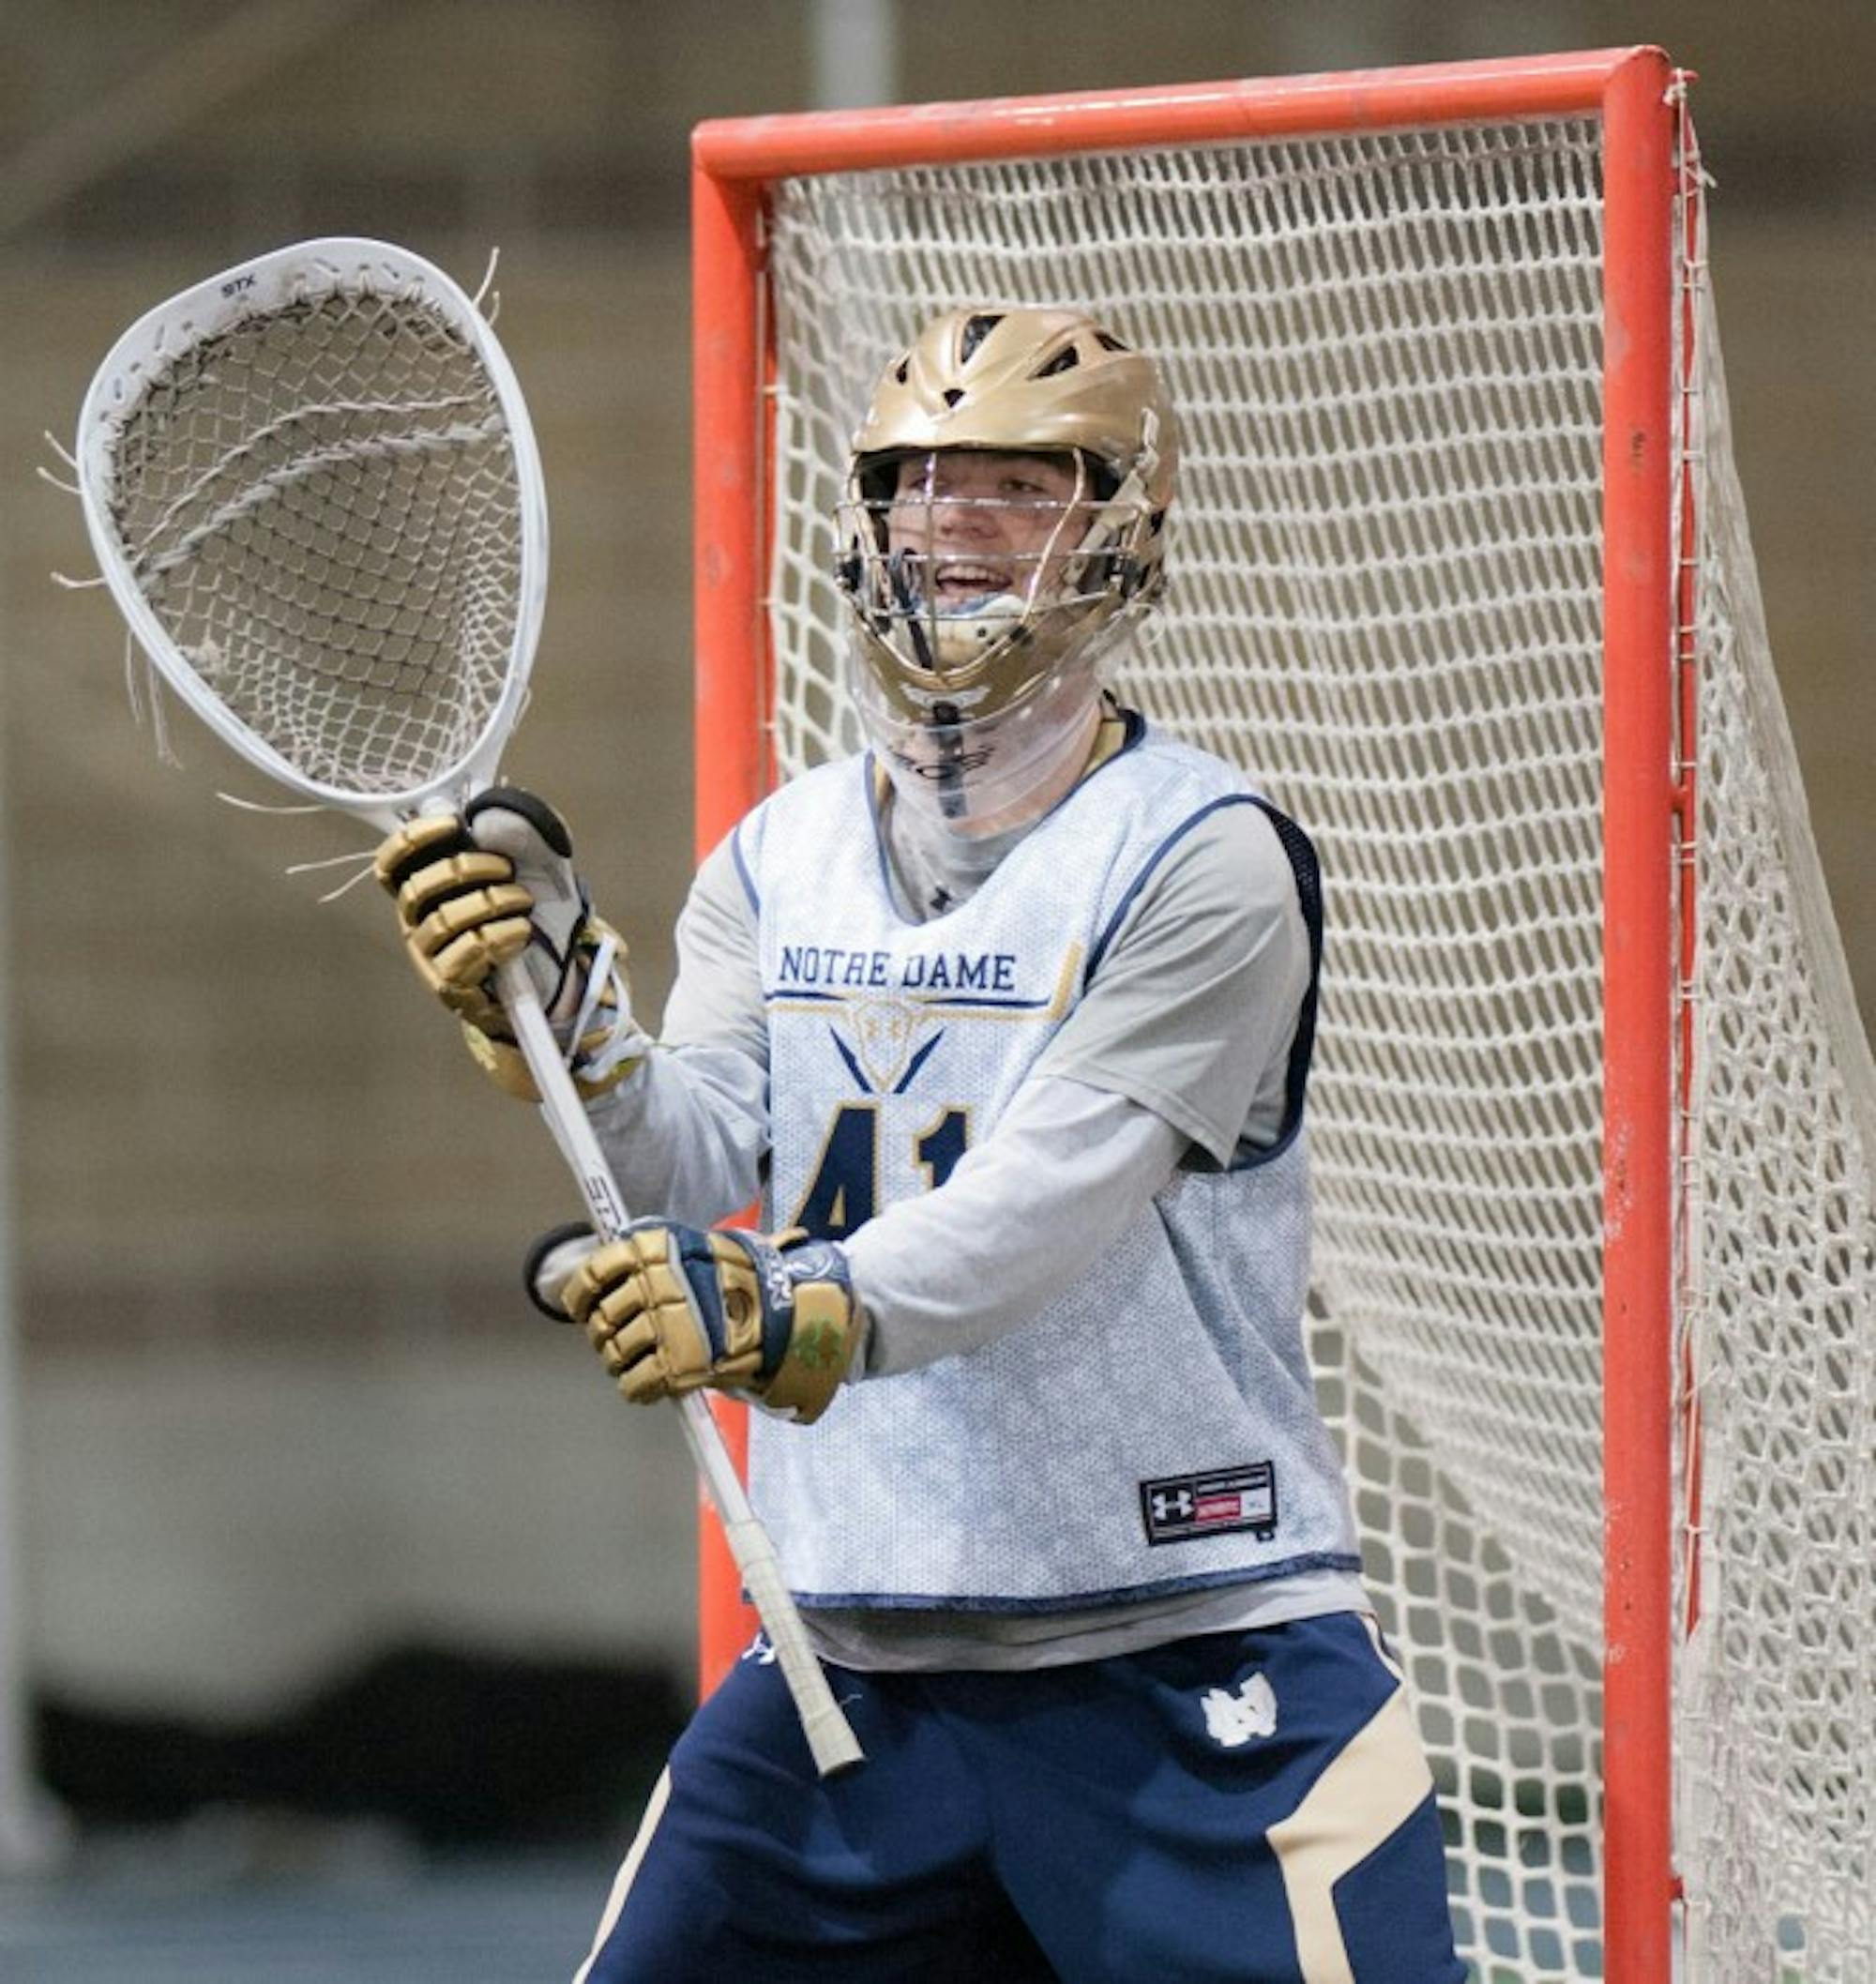 Sophomore Shane Doss blocks the goal in a scrimmage against Air Force on Jan. 31 at Loftus Sports Center. Doss has 91 saves for Notre Dame this season.